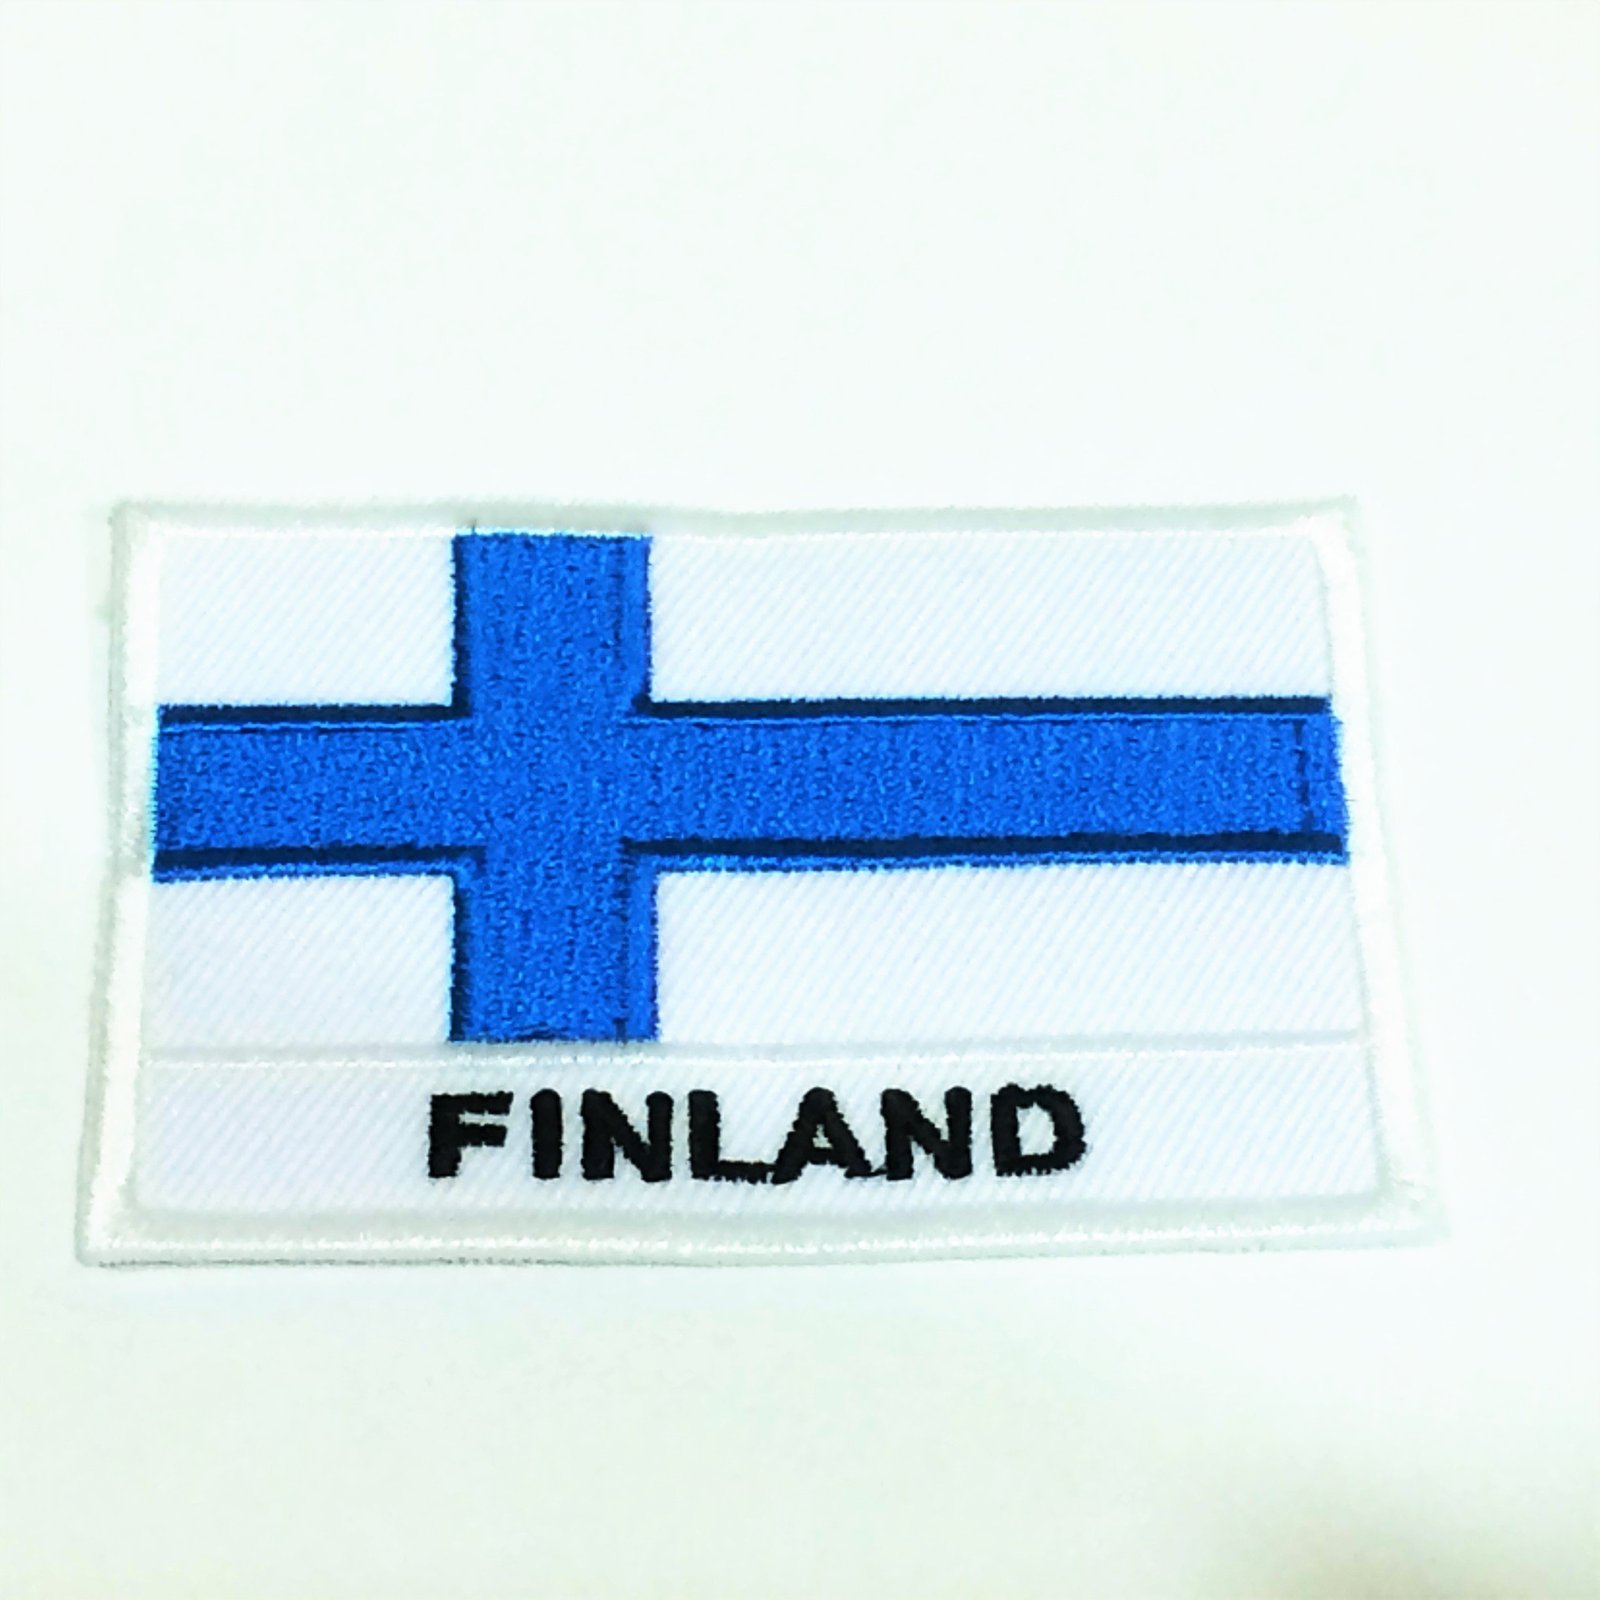 Finland Flag Patch Emblem Logo Badge 2 x 2.8 Sew On Embroidered National He...